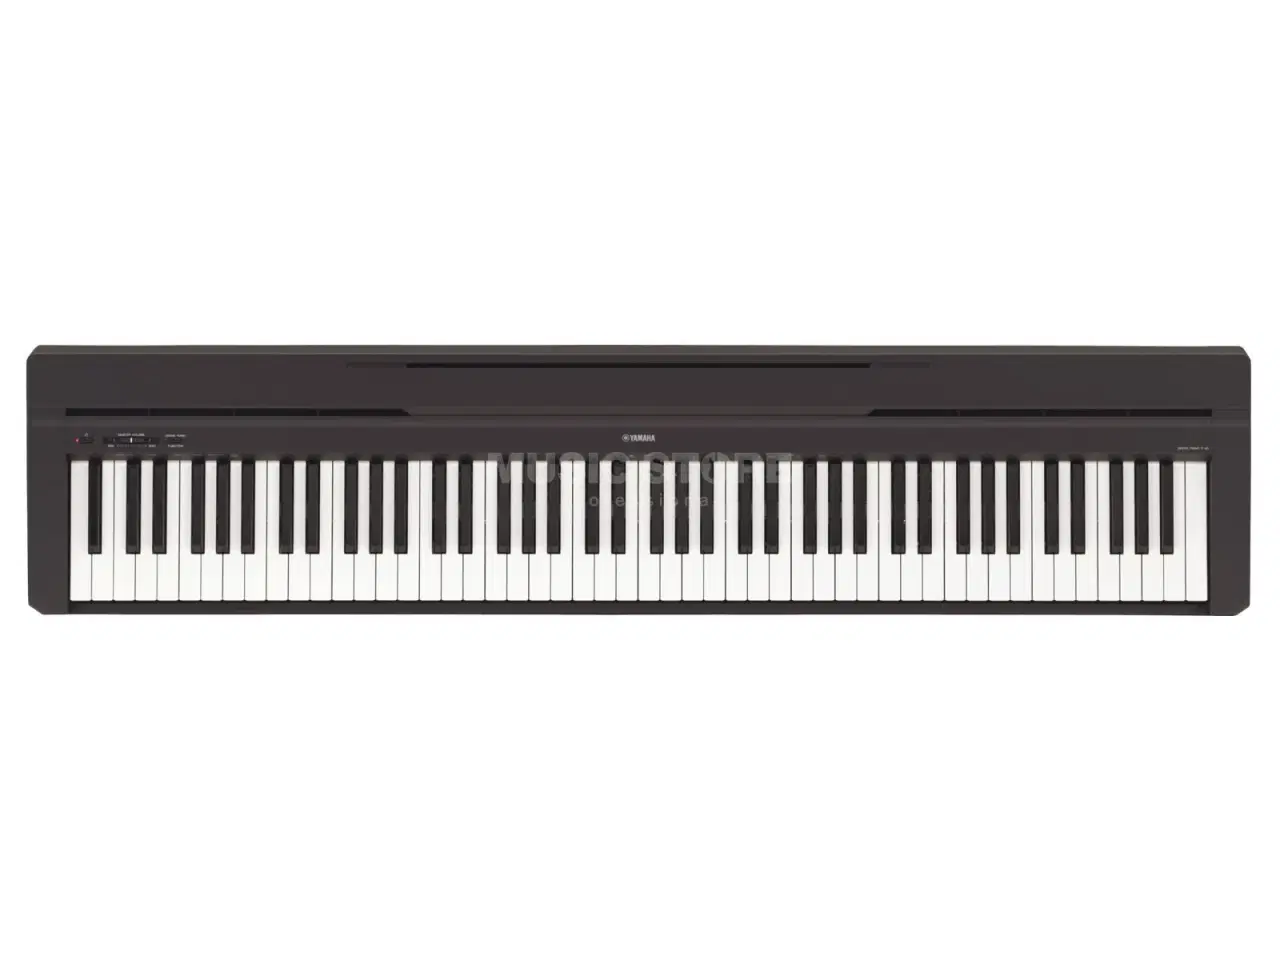 Billede 2 - Yamaha p45 stage piano